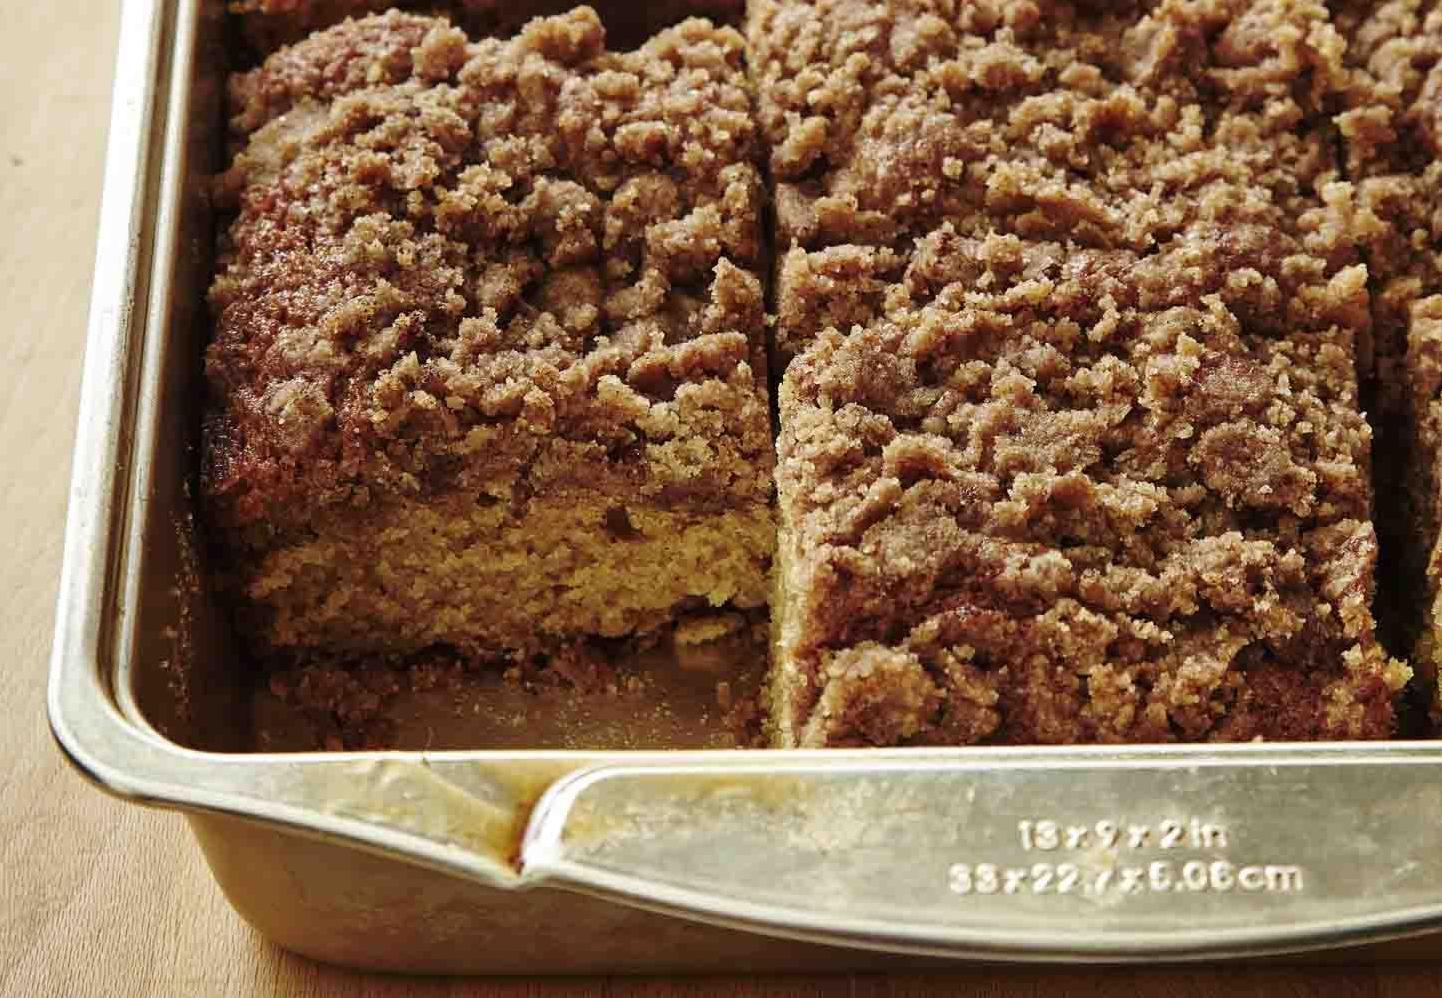  Satisfy your sweet cravings with a slice of this old-fashioned coffee cake